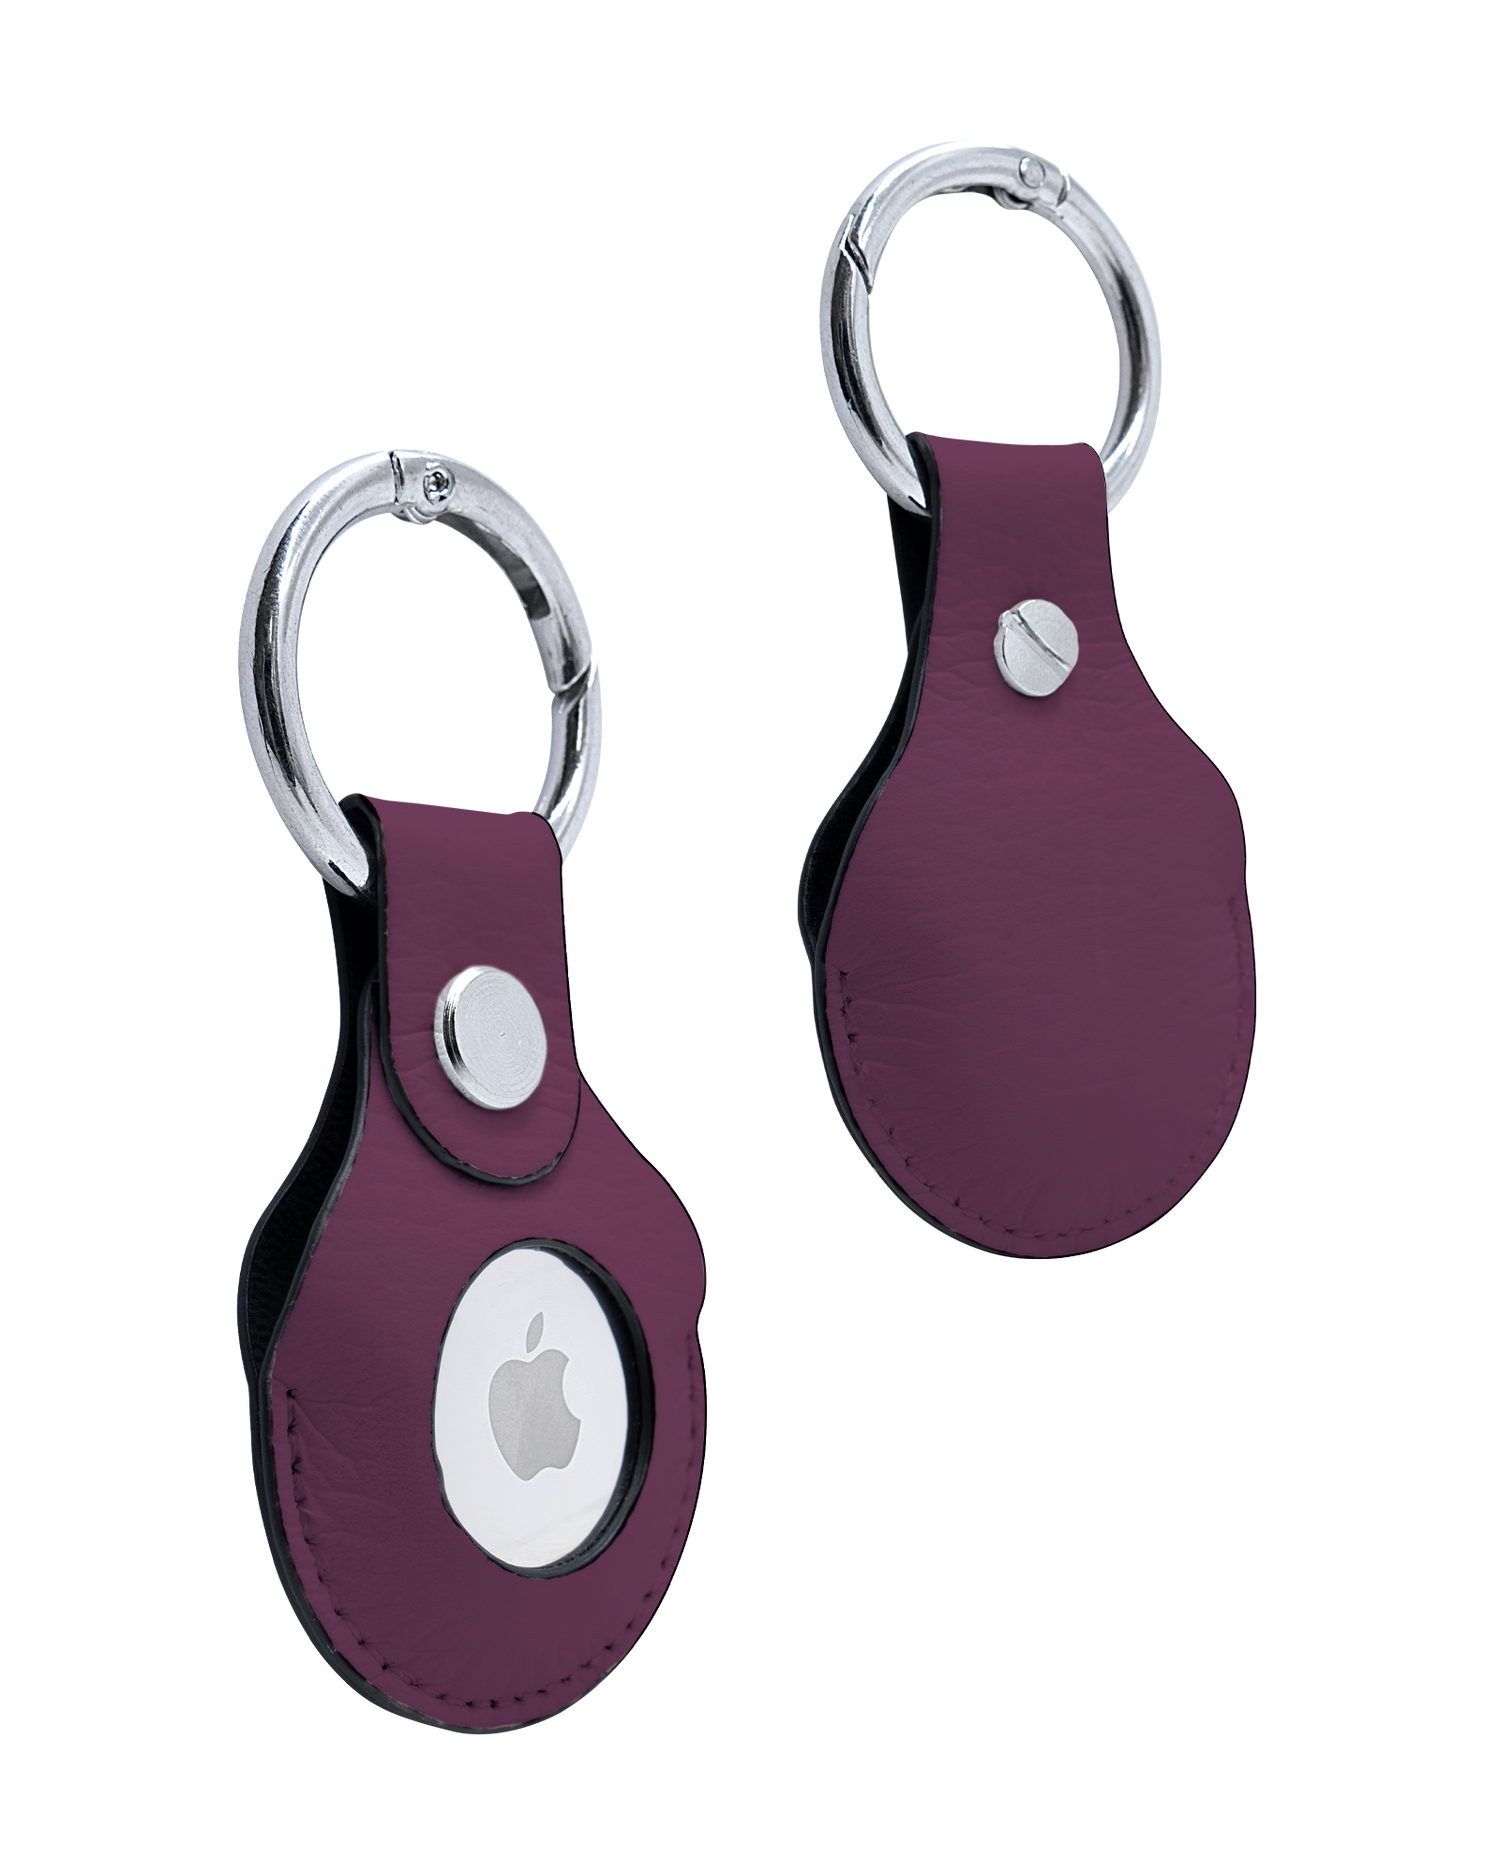 AirTag Holder with PLUM Design: Front and Back